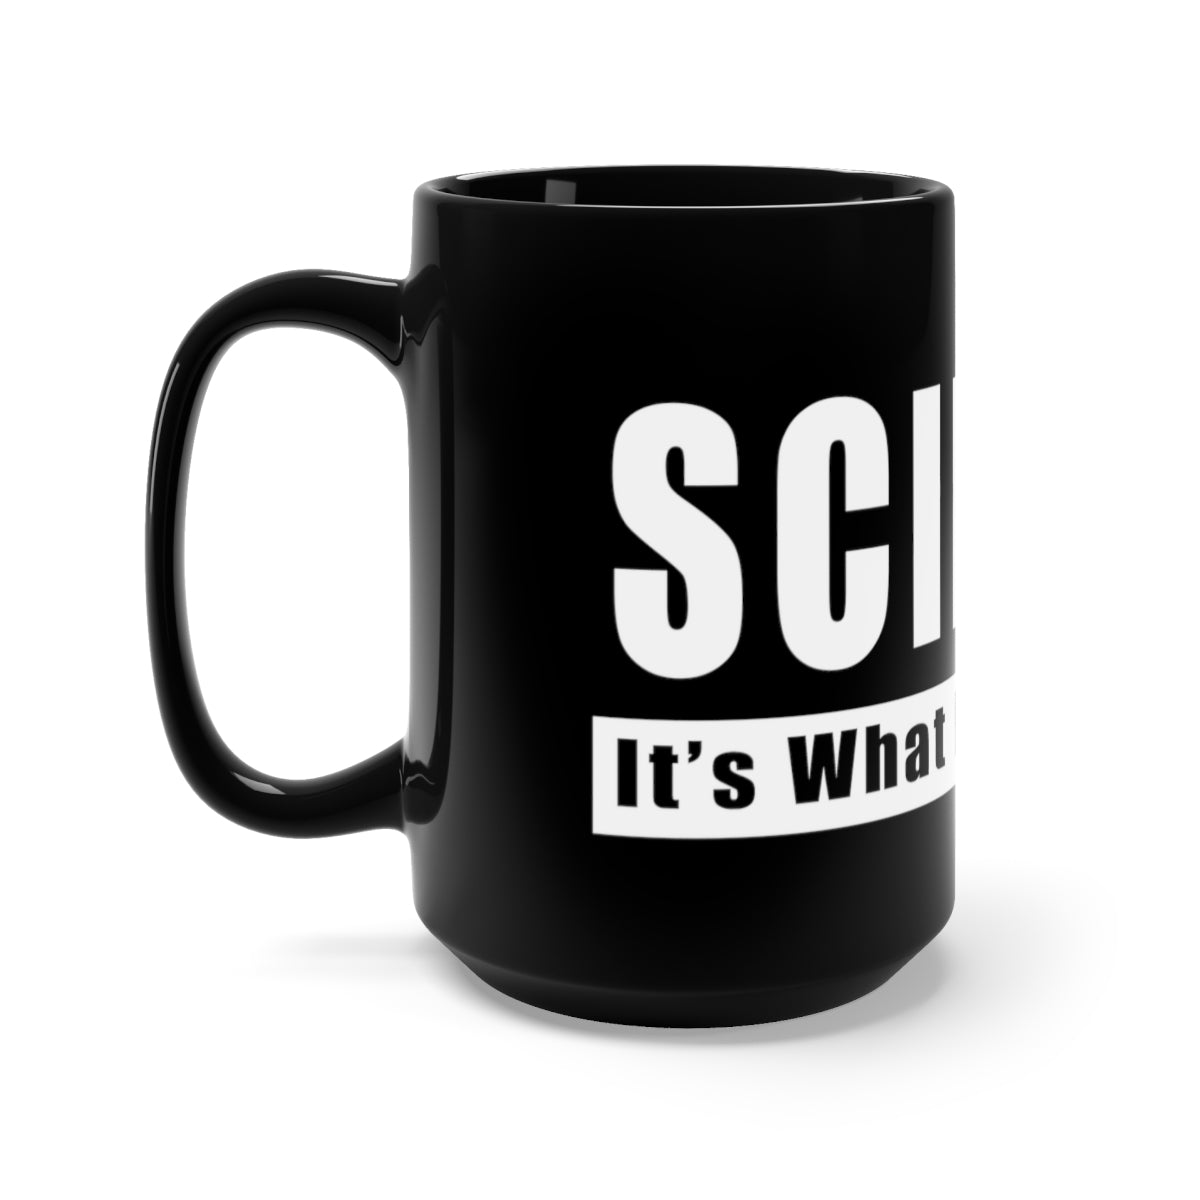 Science - It's What It's All About - Black Mug 15oz